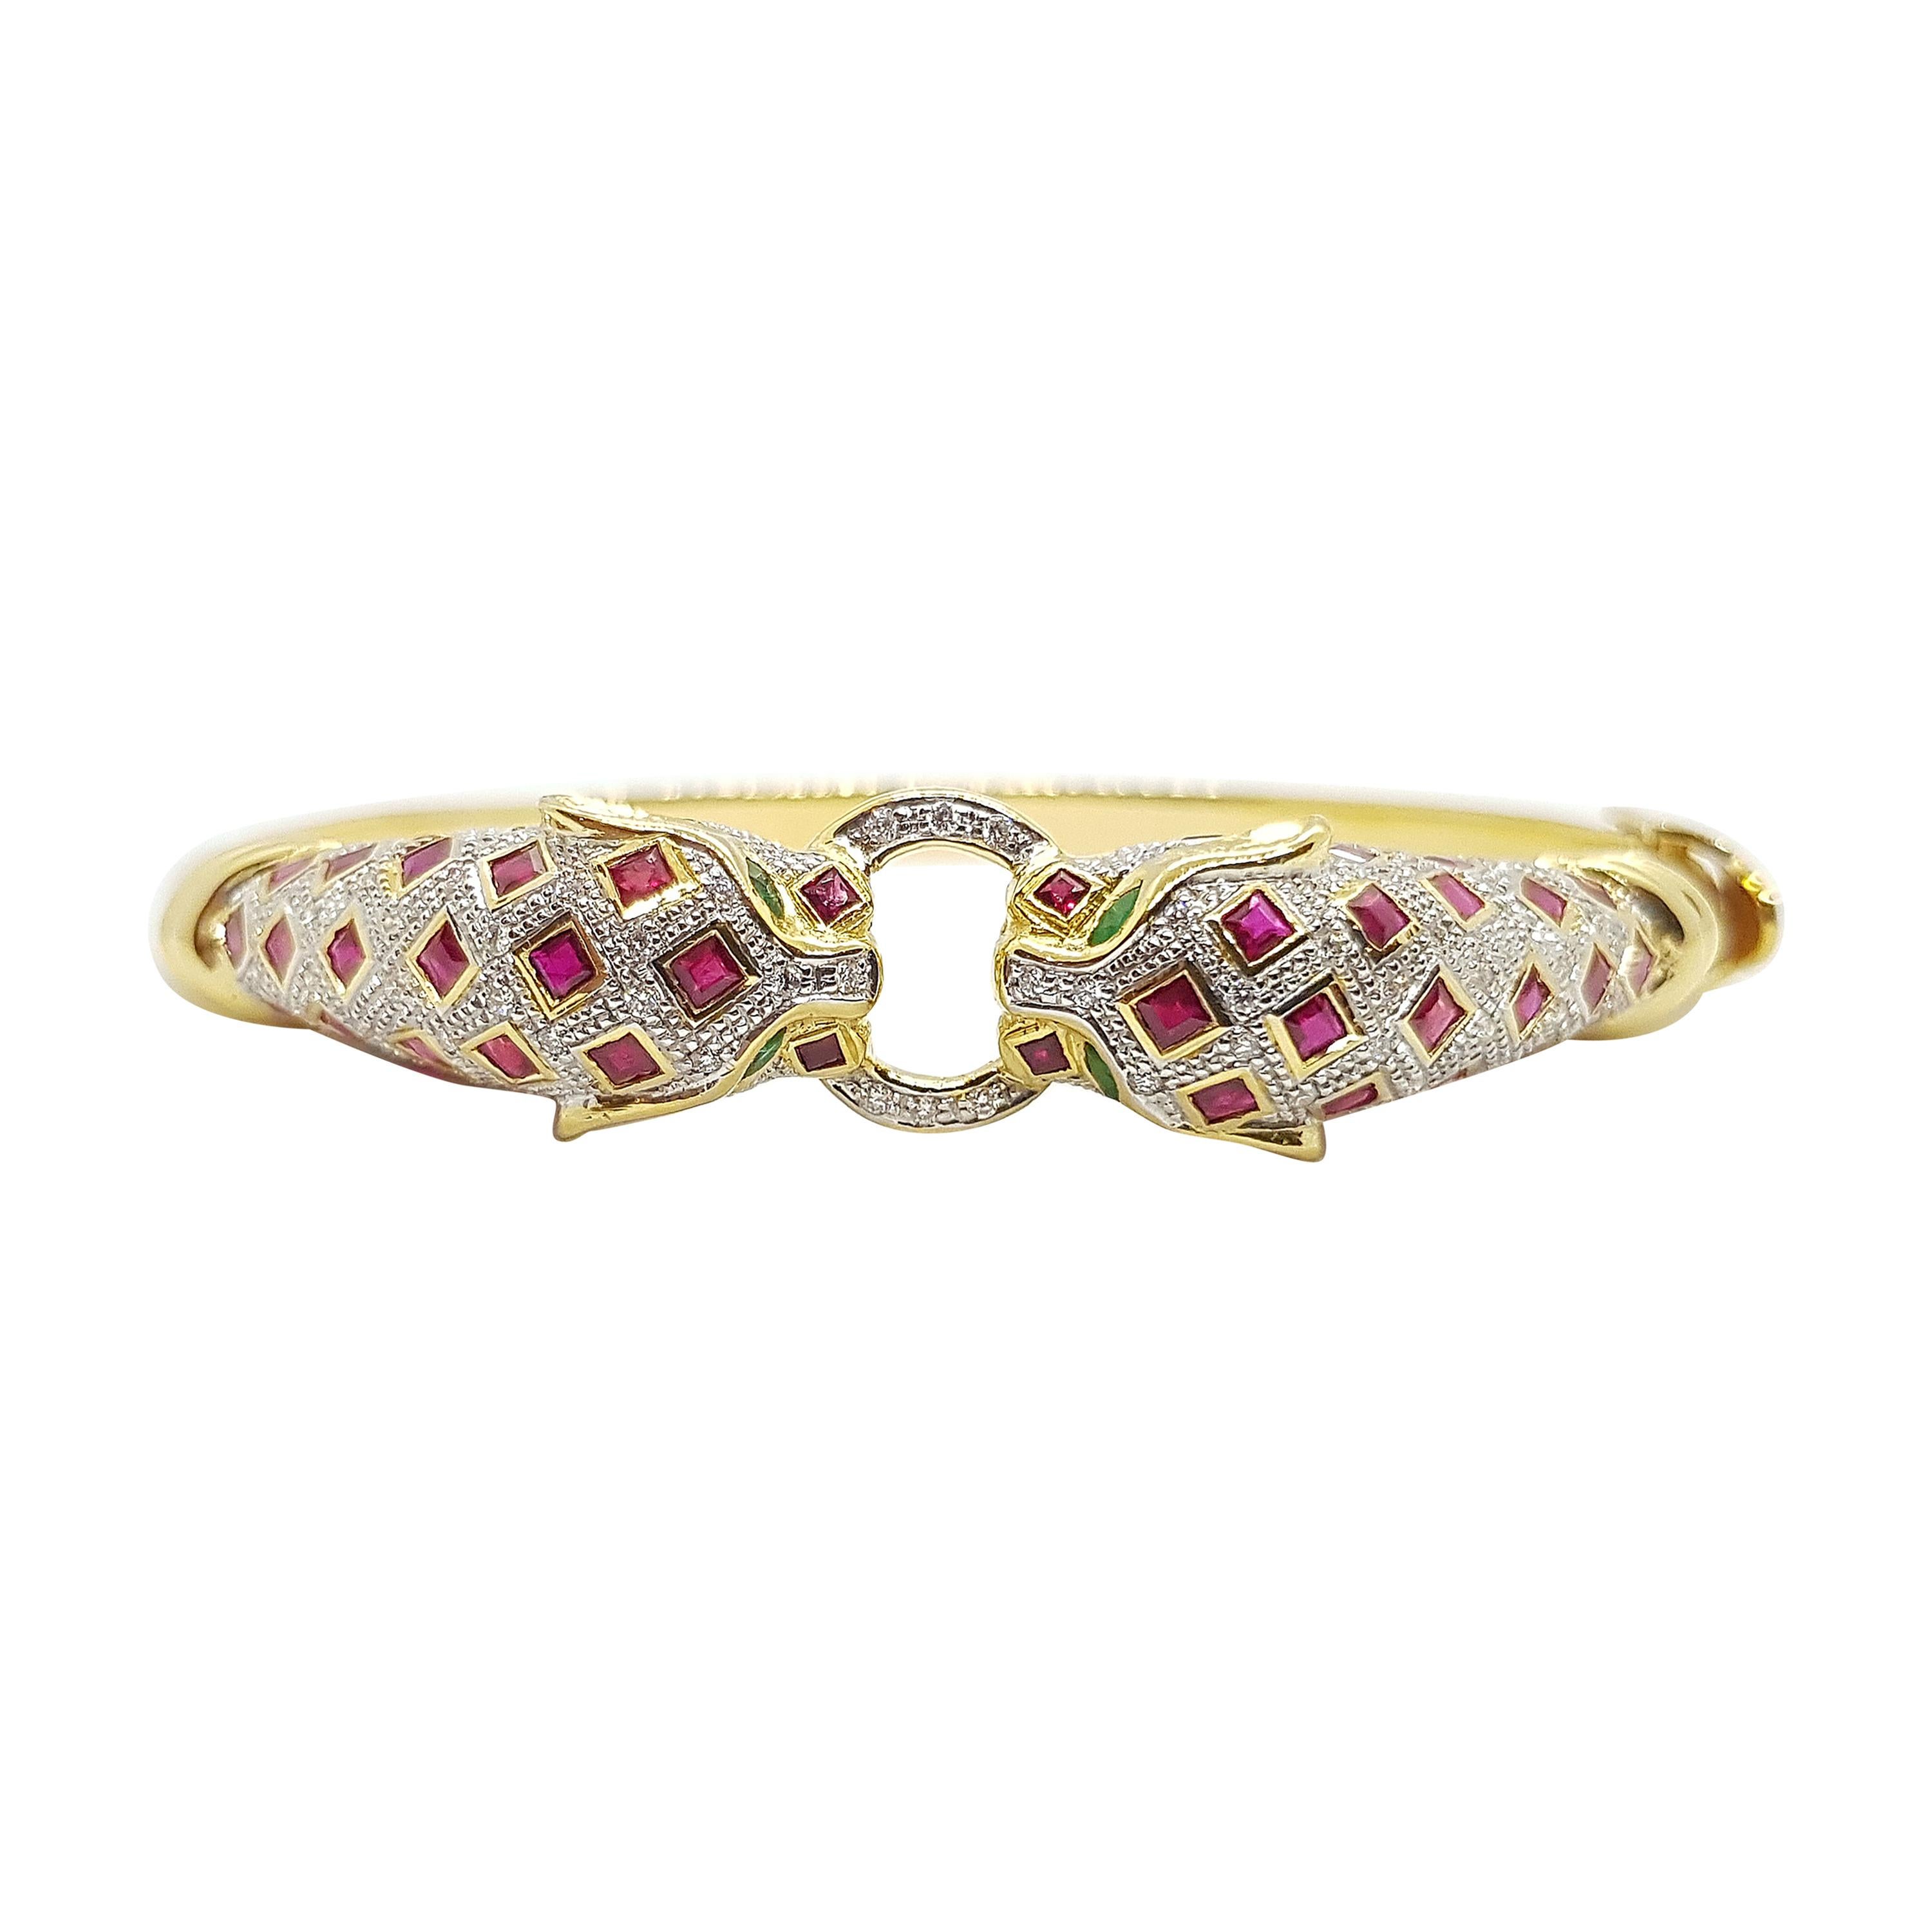 Ruby with Emerald and Diamond Panther Bangle Set in 18 Karat Gold Settings